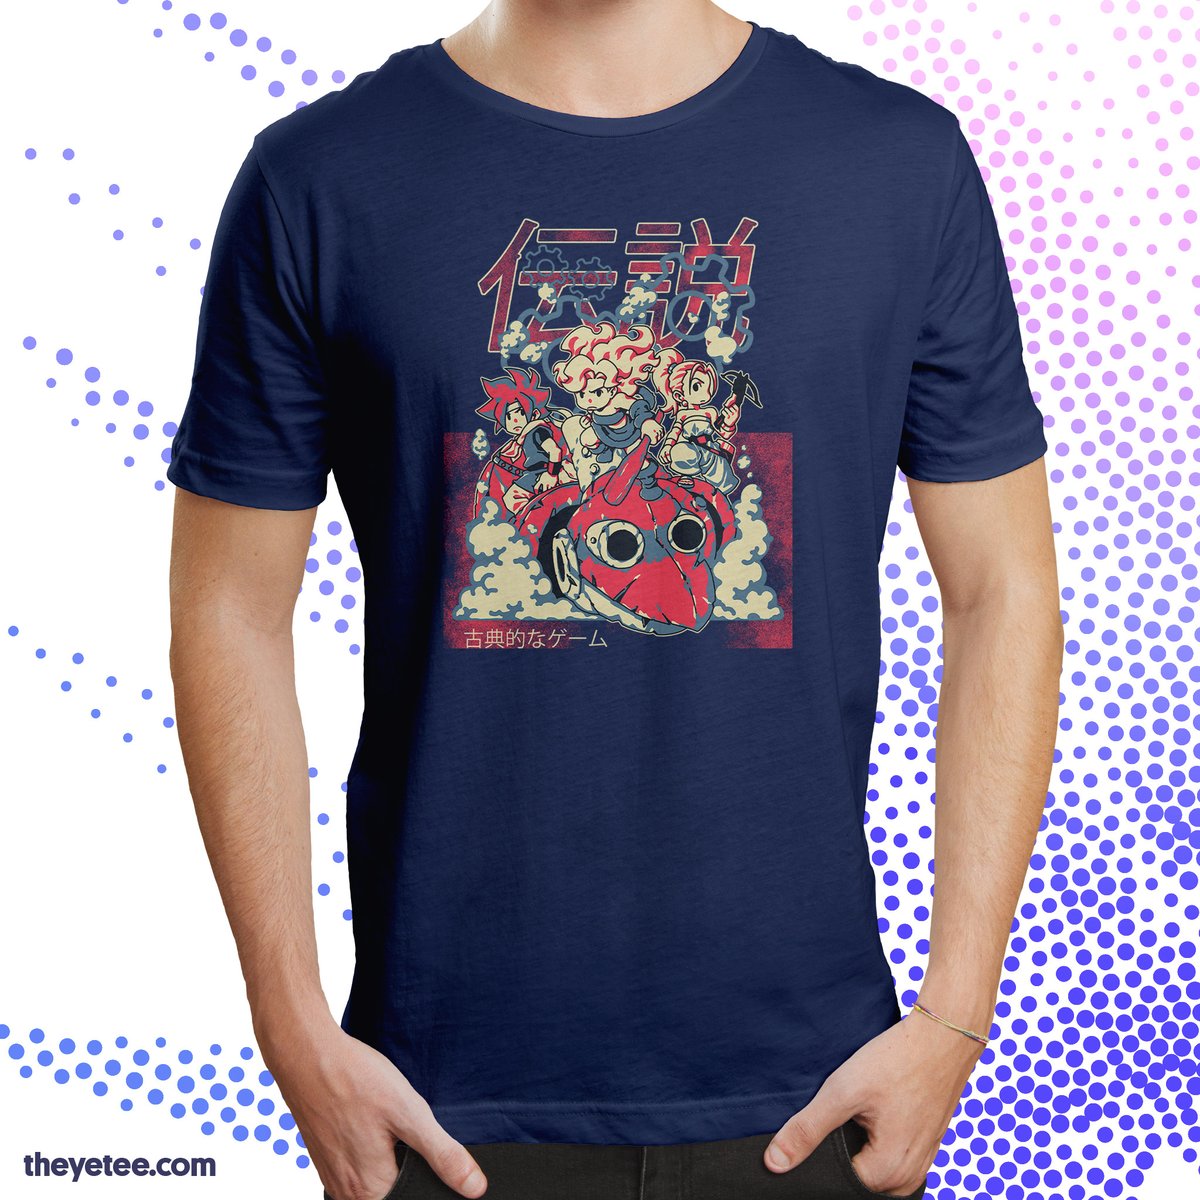 「Time and time again, they're going to co」|The Yetee 🌈のイラスト